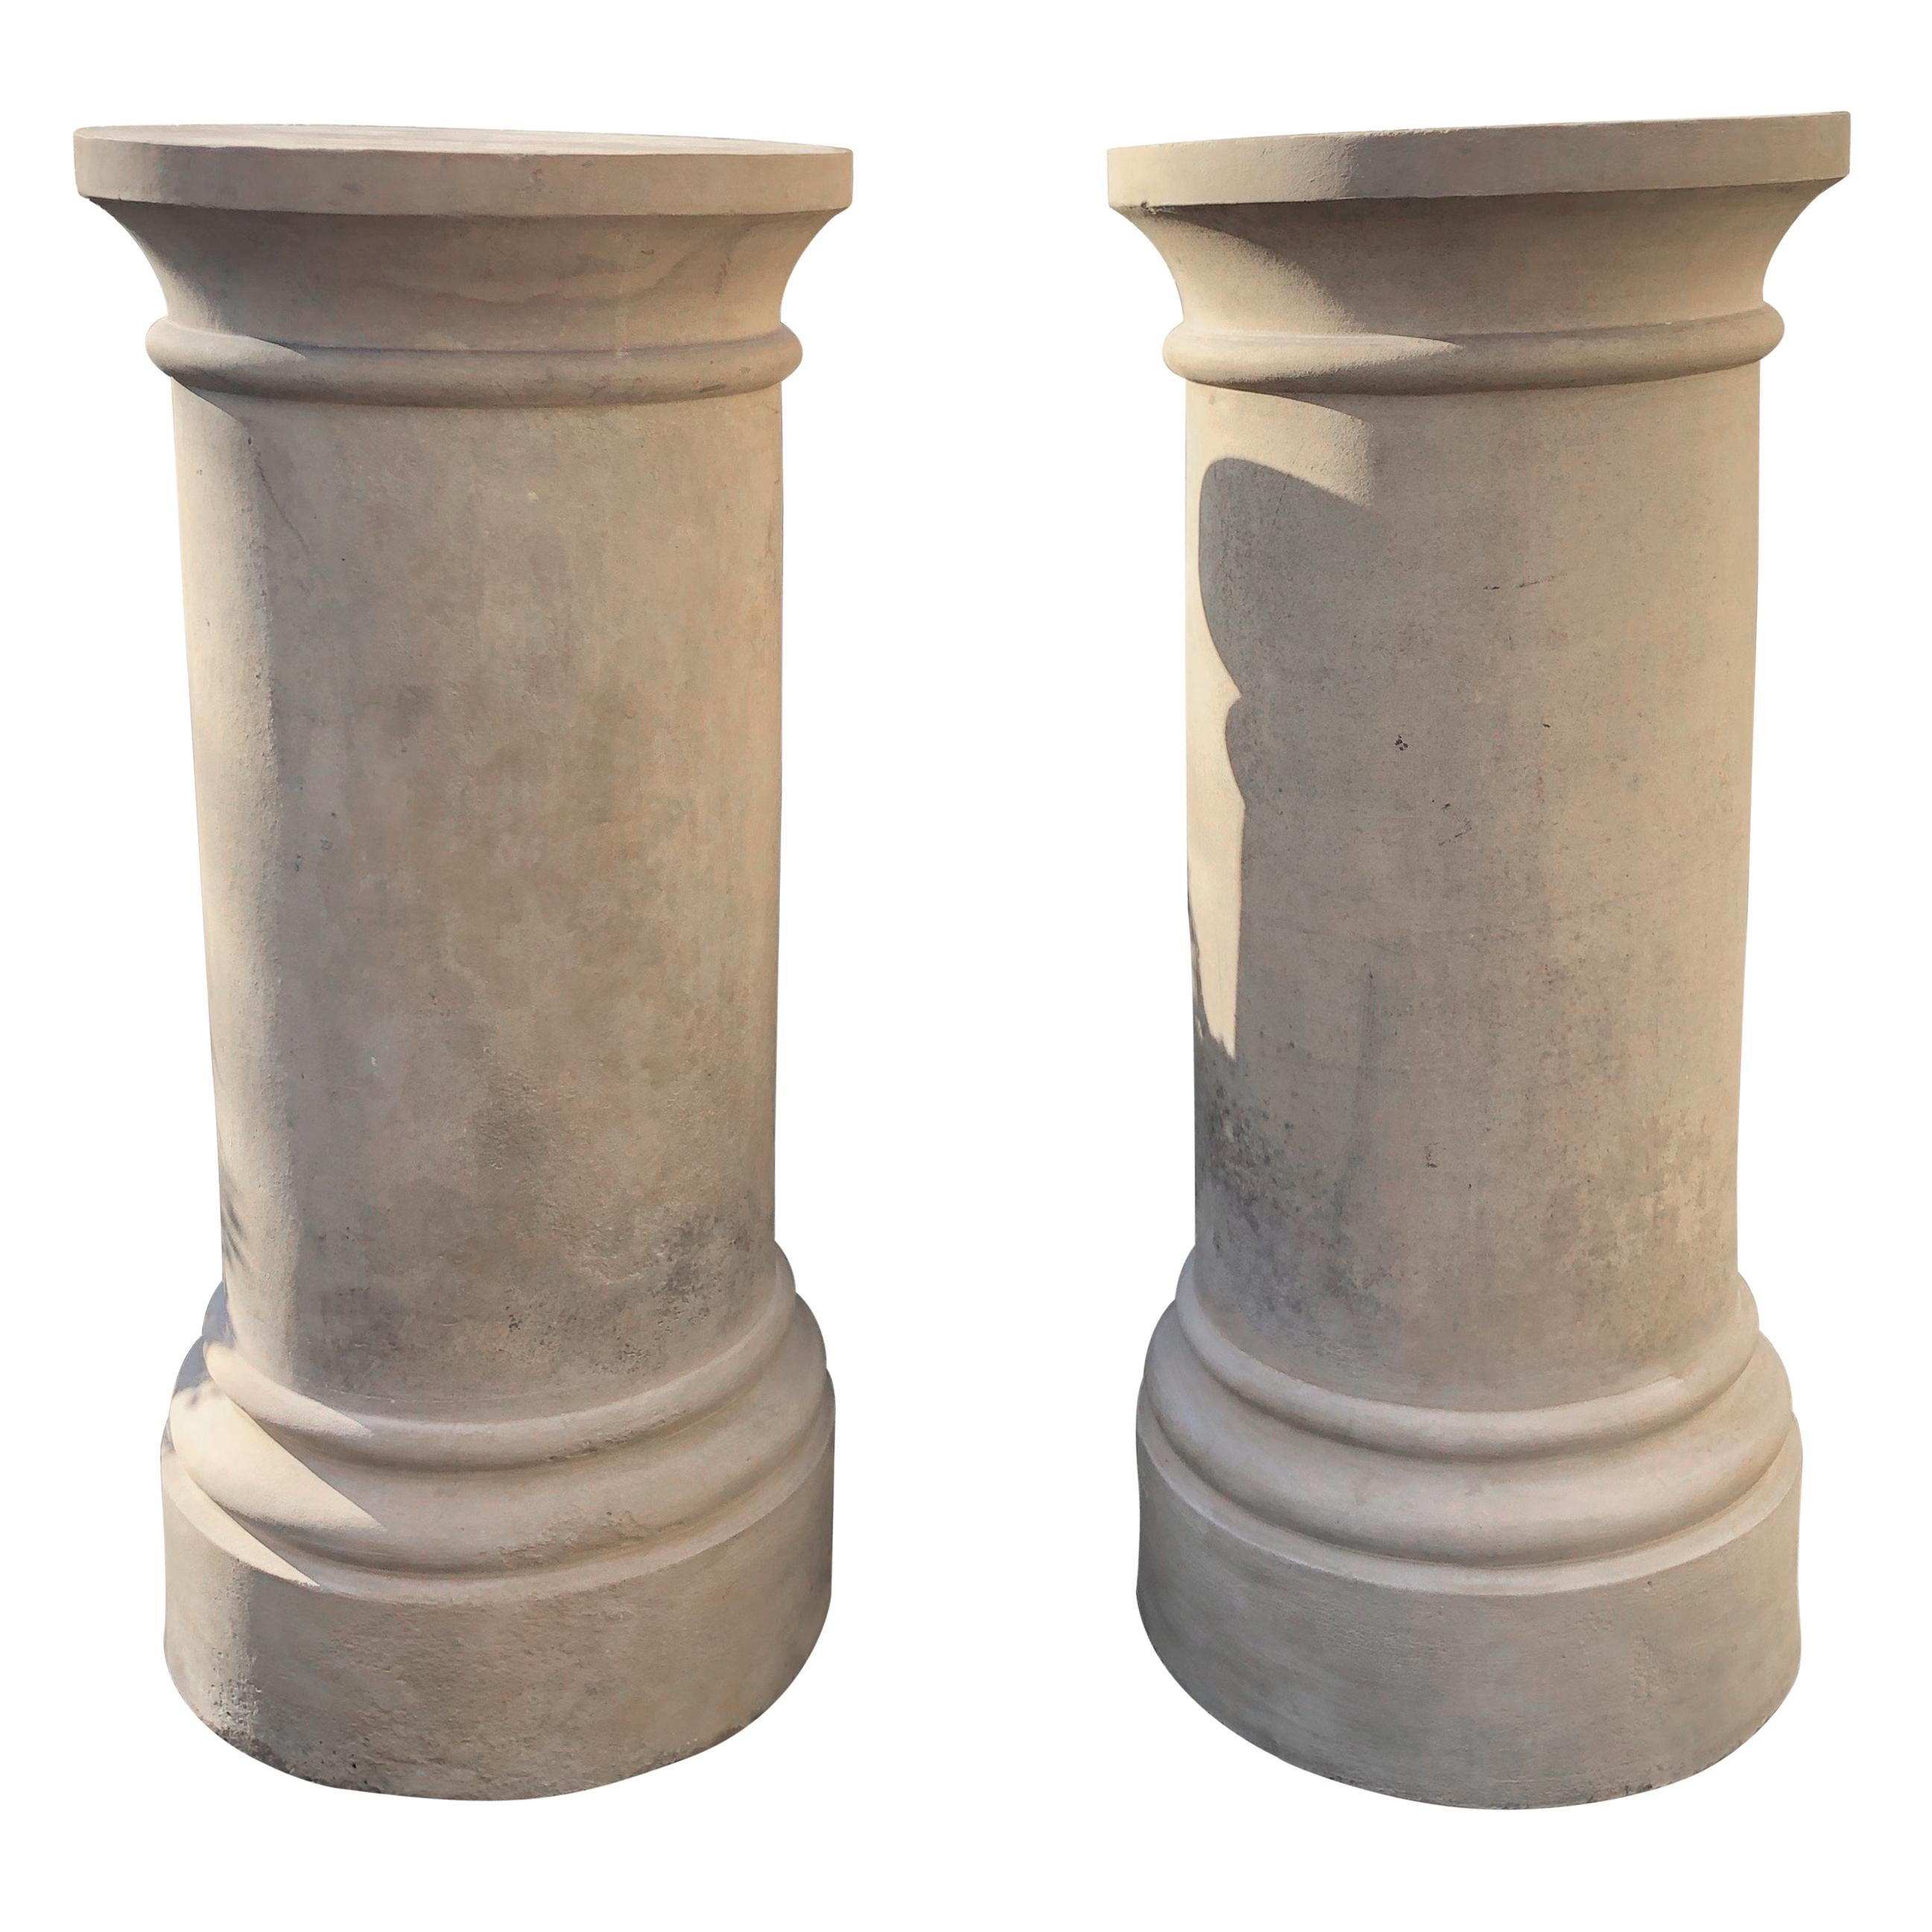 Pair of English 19th Century Terracotta Pedestals by James Stiff and Sons